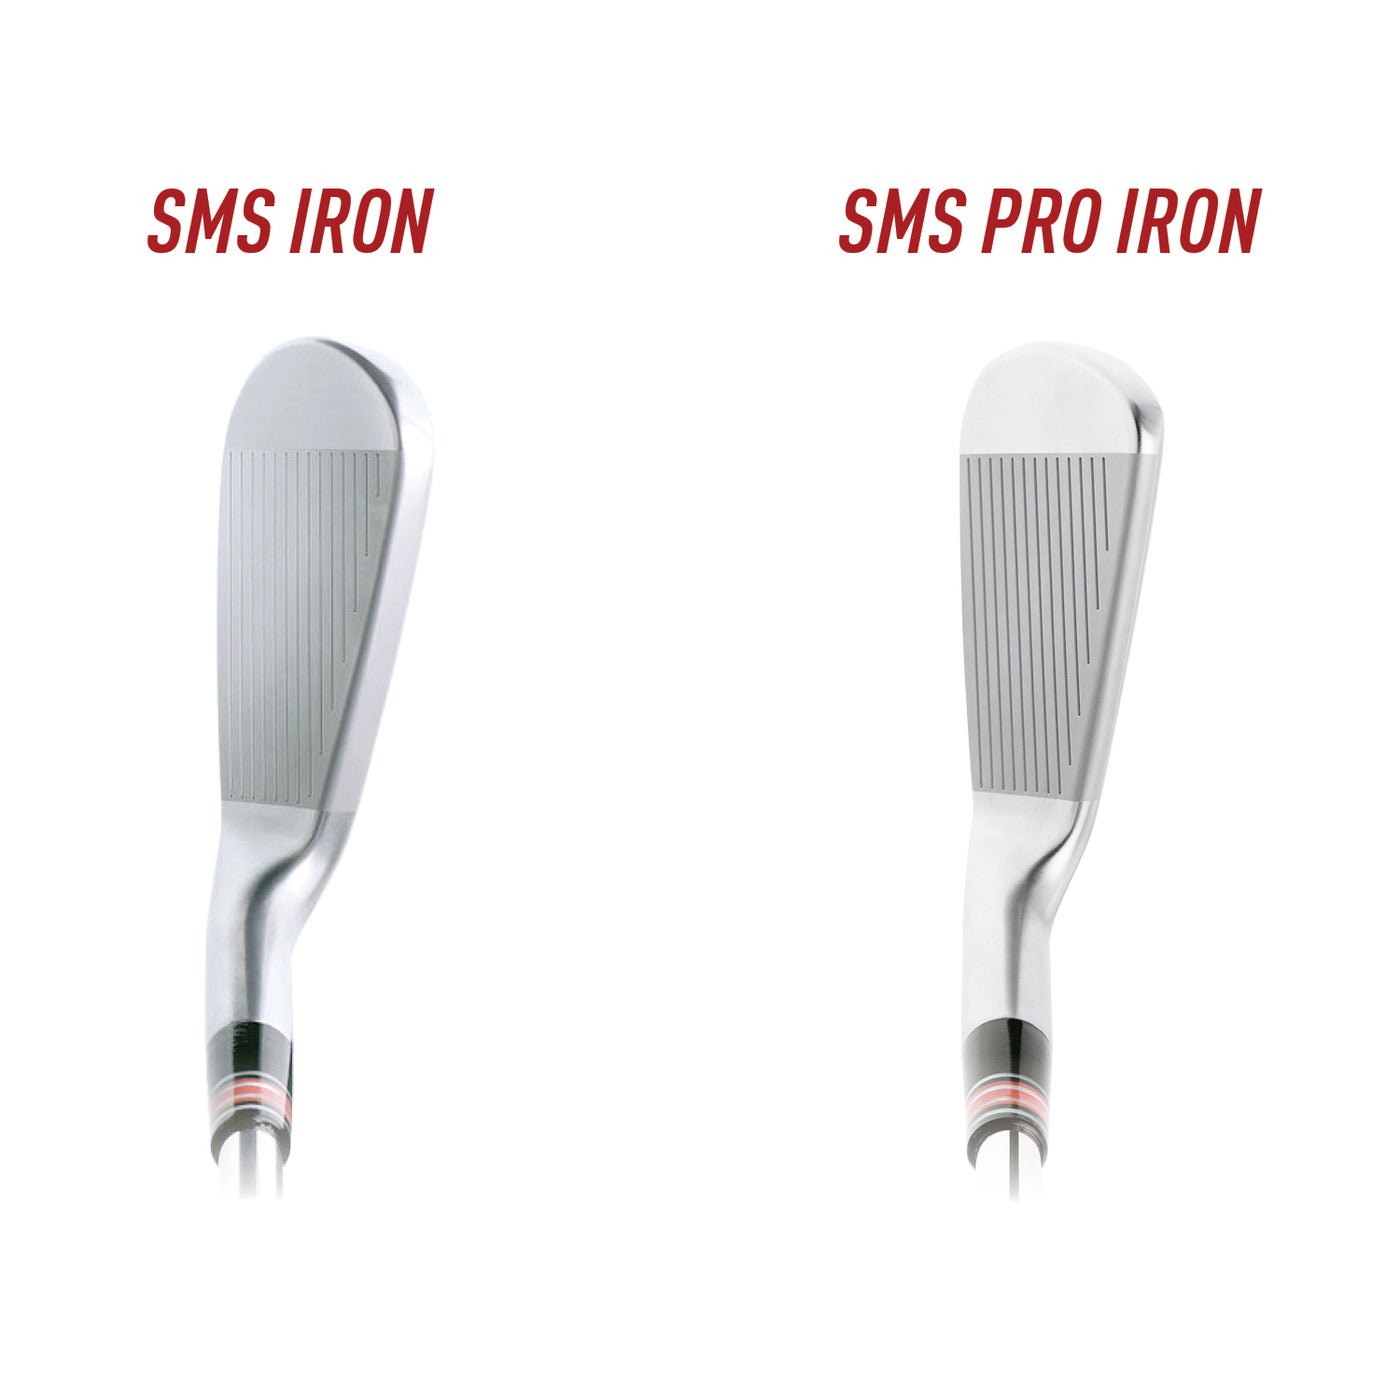 SMS vs. SMS Pro Irons Player View